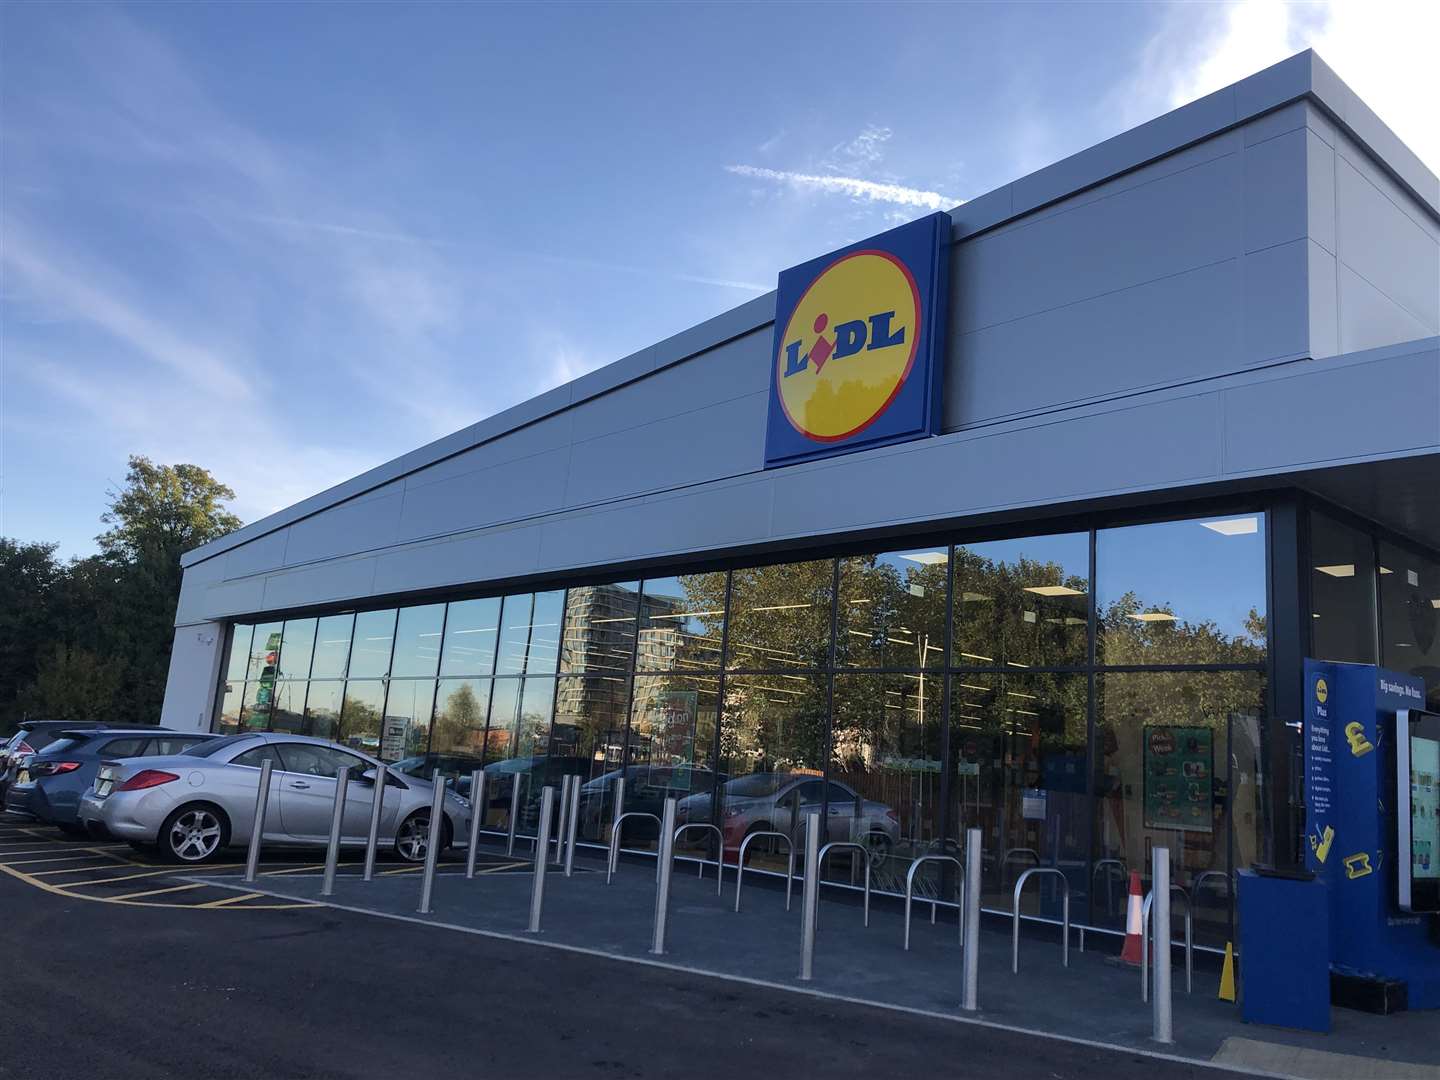 Lidl has opened in Medway Road, Gillingham, after a long running store wars